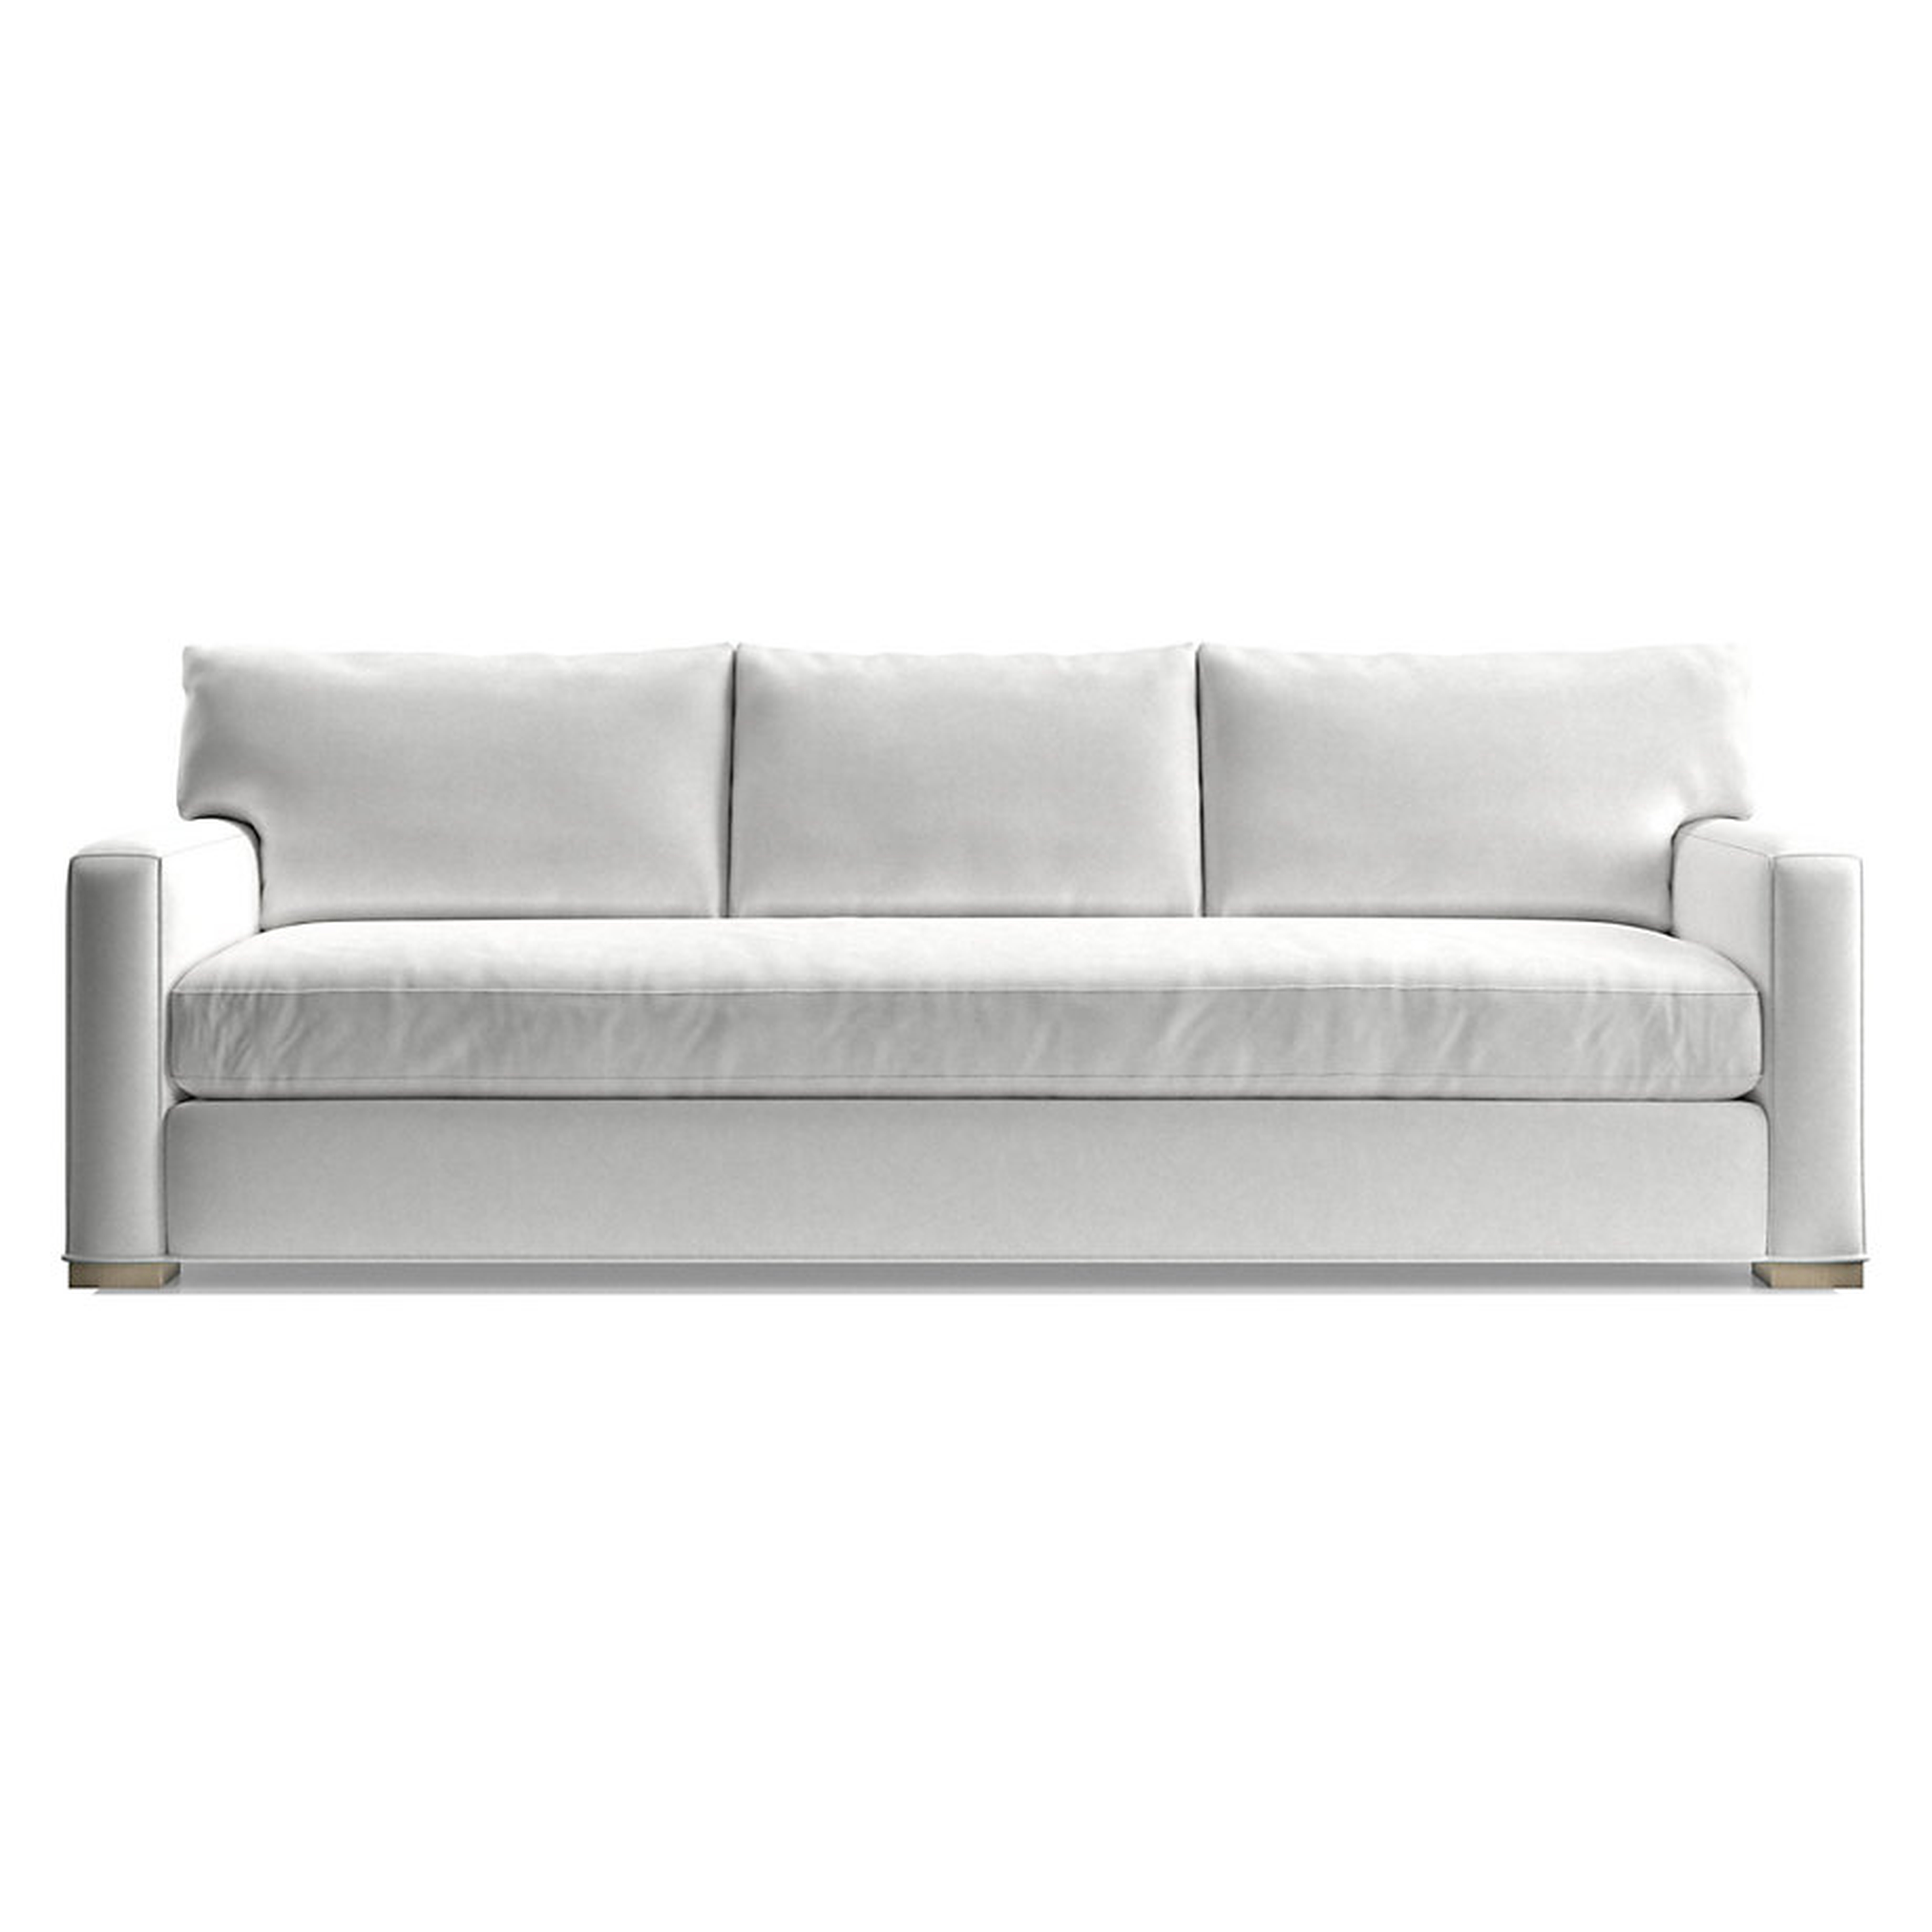 Axis Bench Grande Sofa - Douglas "Lace" 105"w - Crate and Barrel